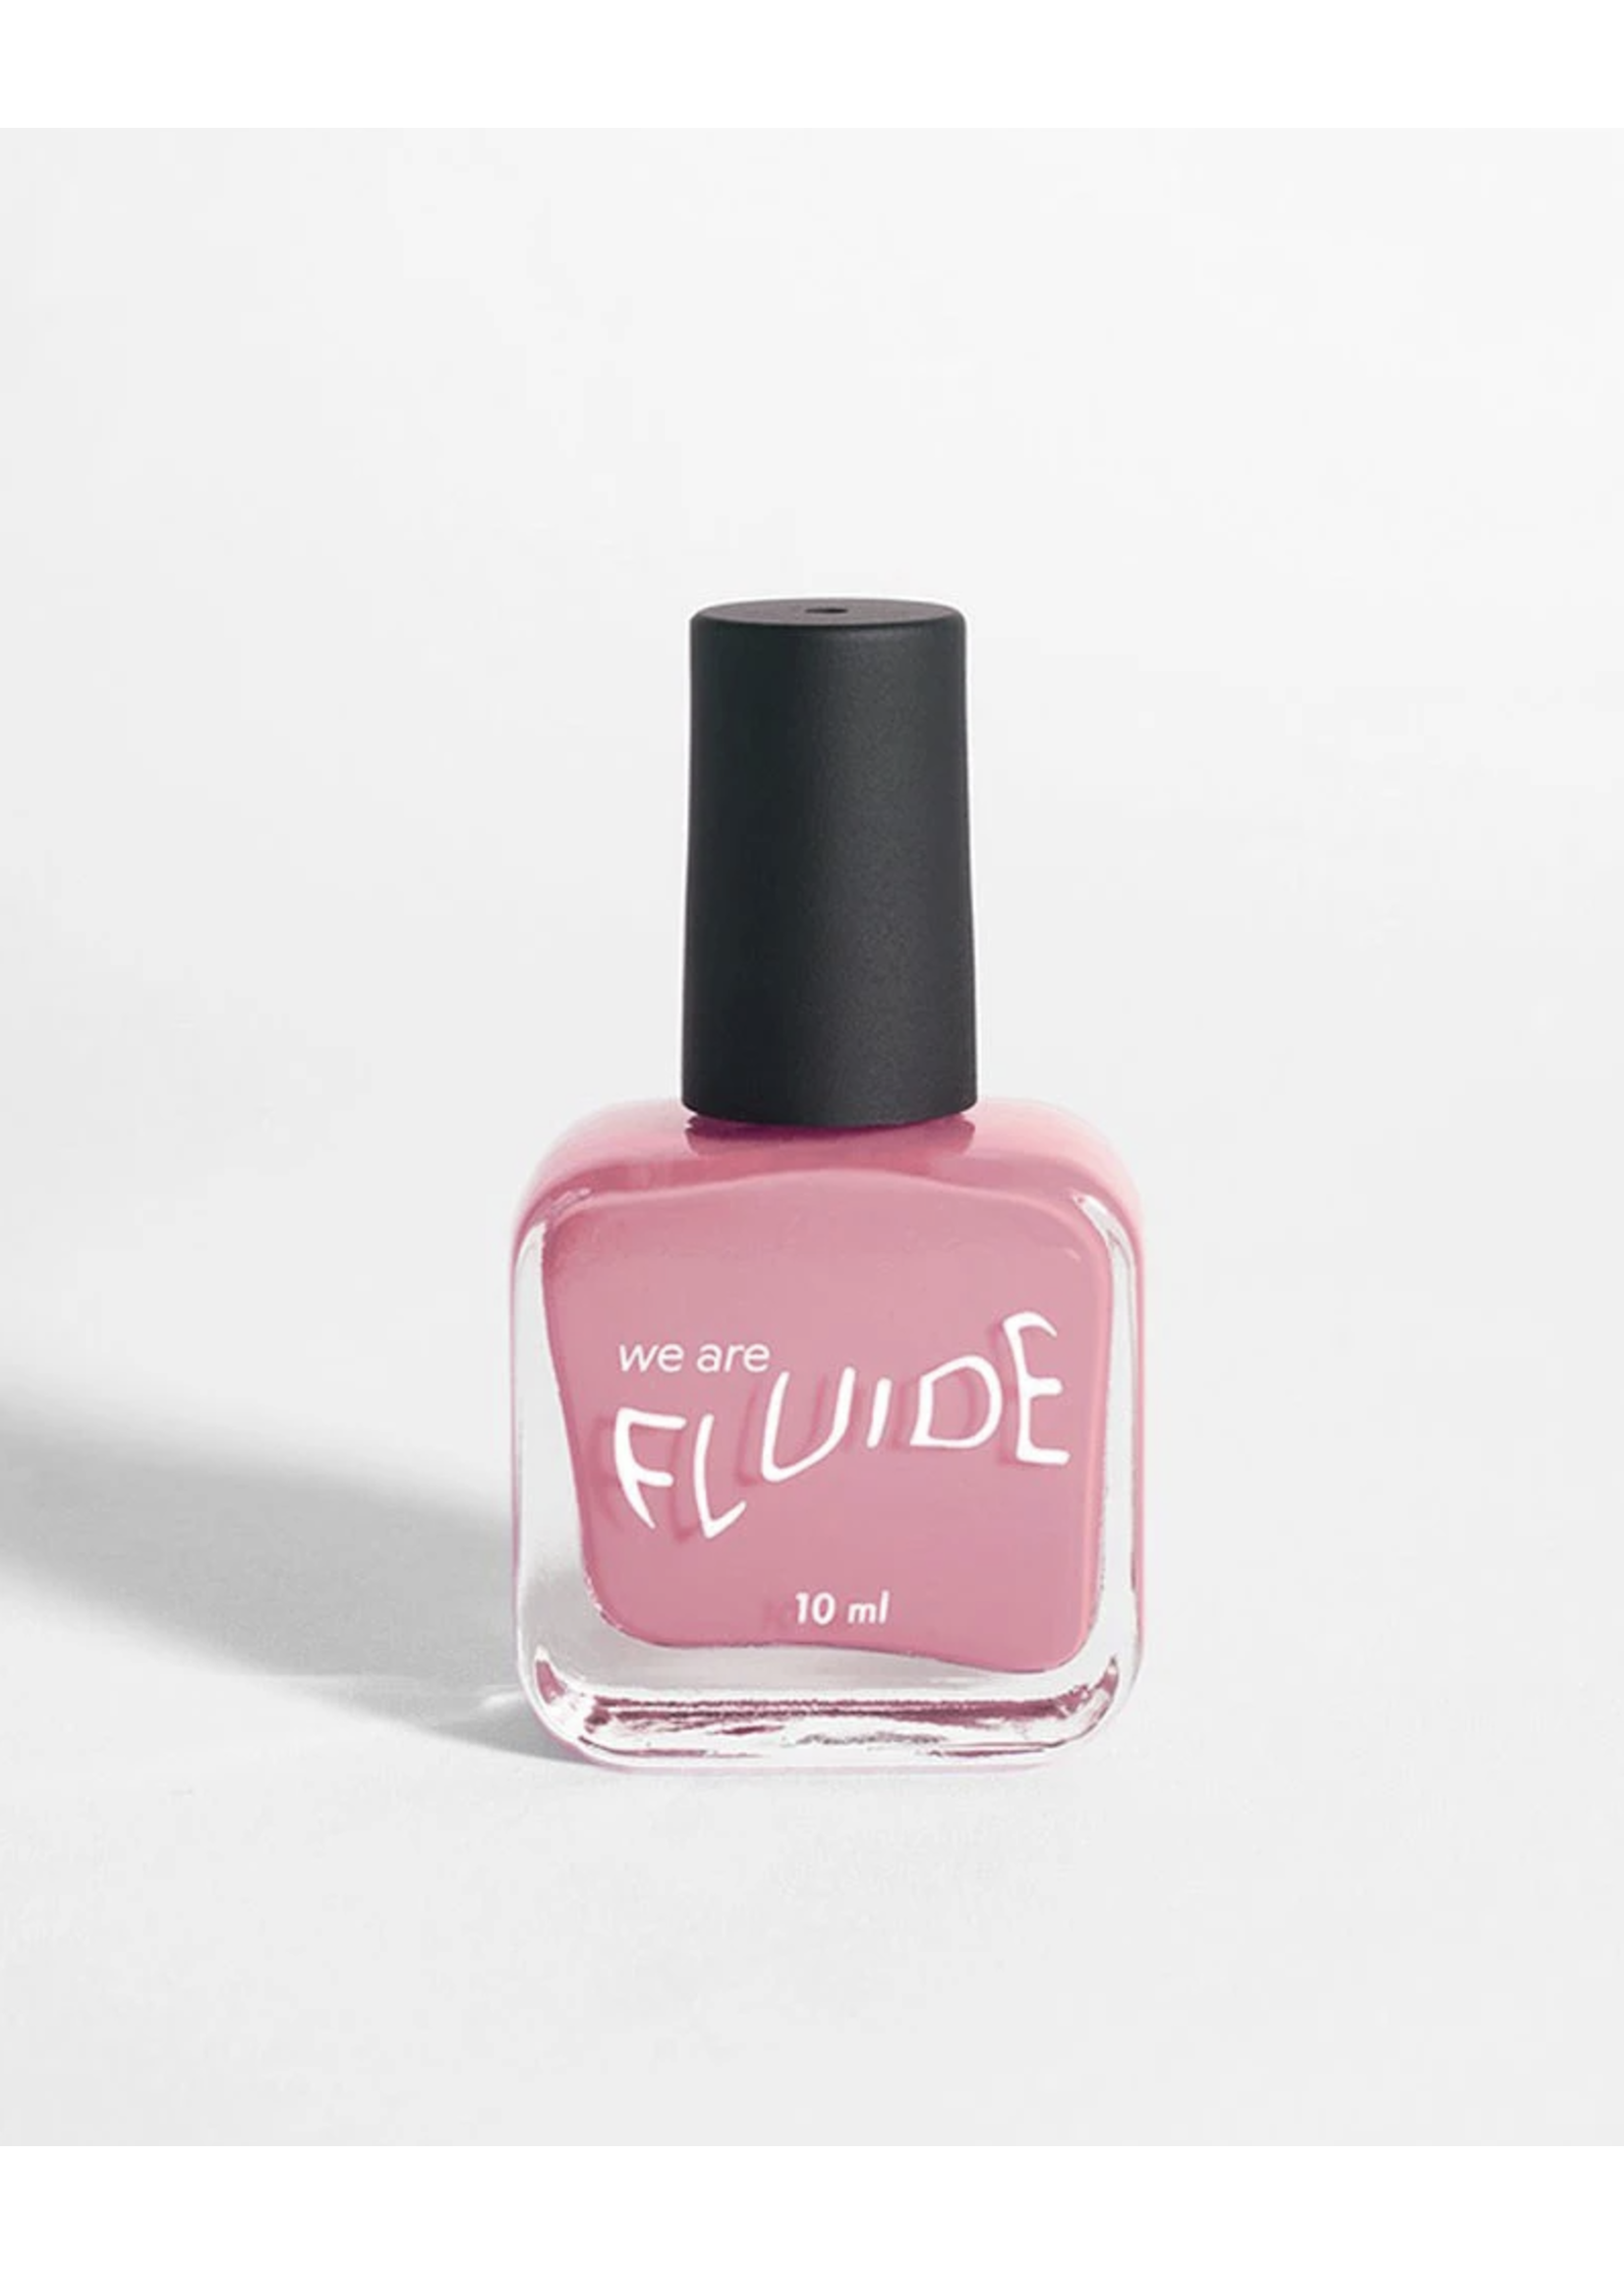 Fluide Beauty 7-Free Nail Polishes by Fluide